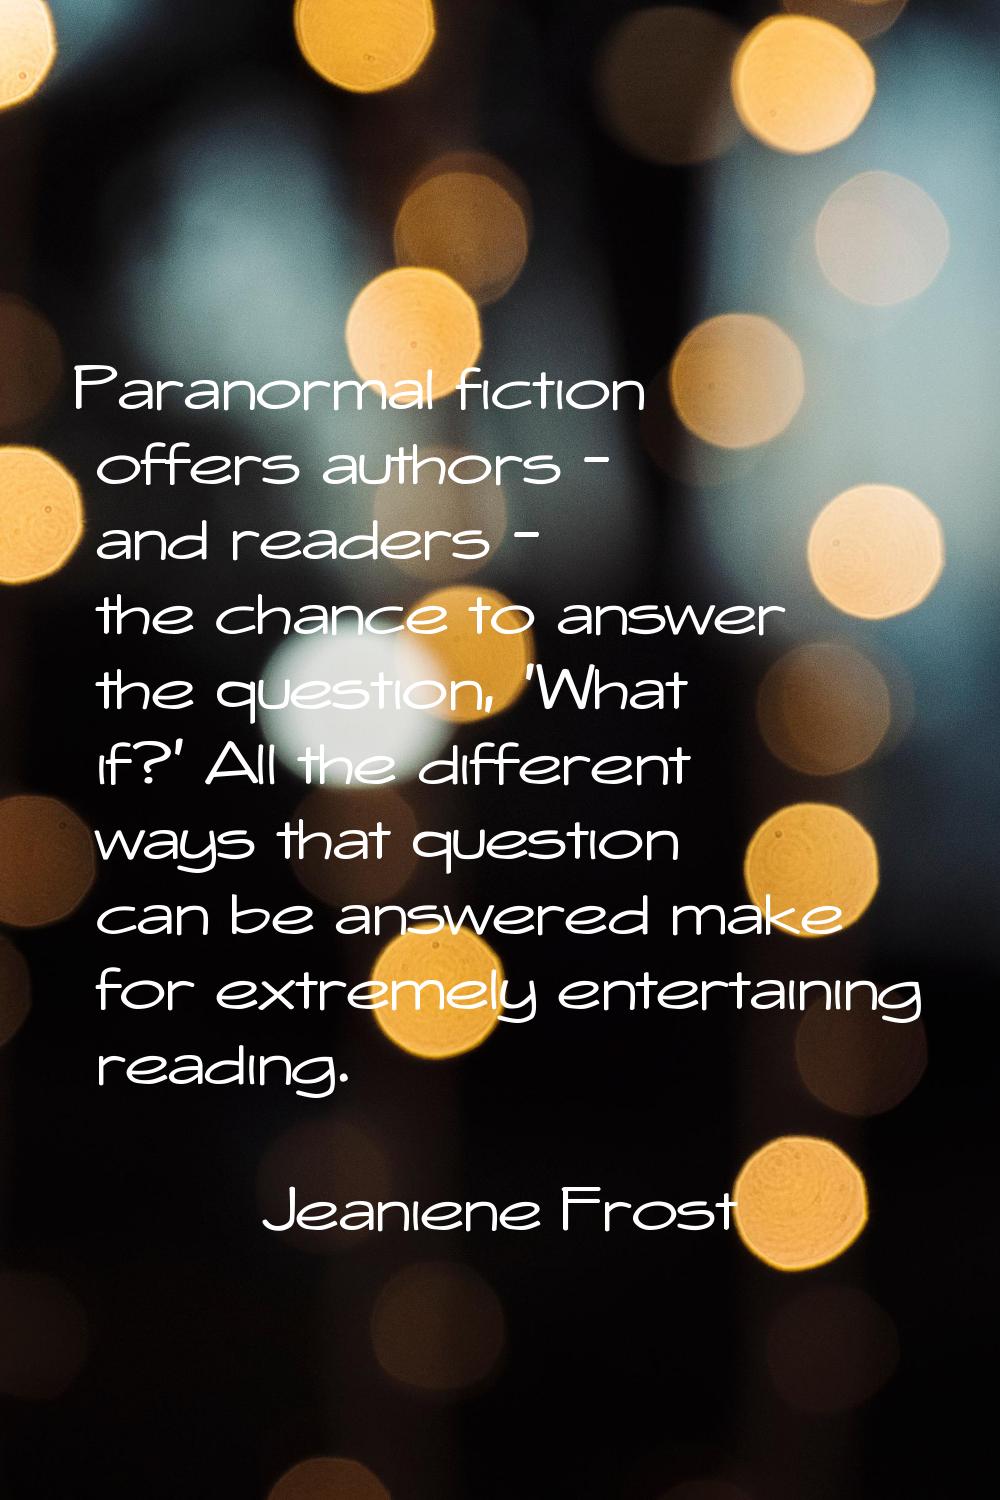 Paranormal fiction offers authors - and readers - the chance to answer the question, 'What if?' All